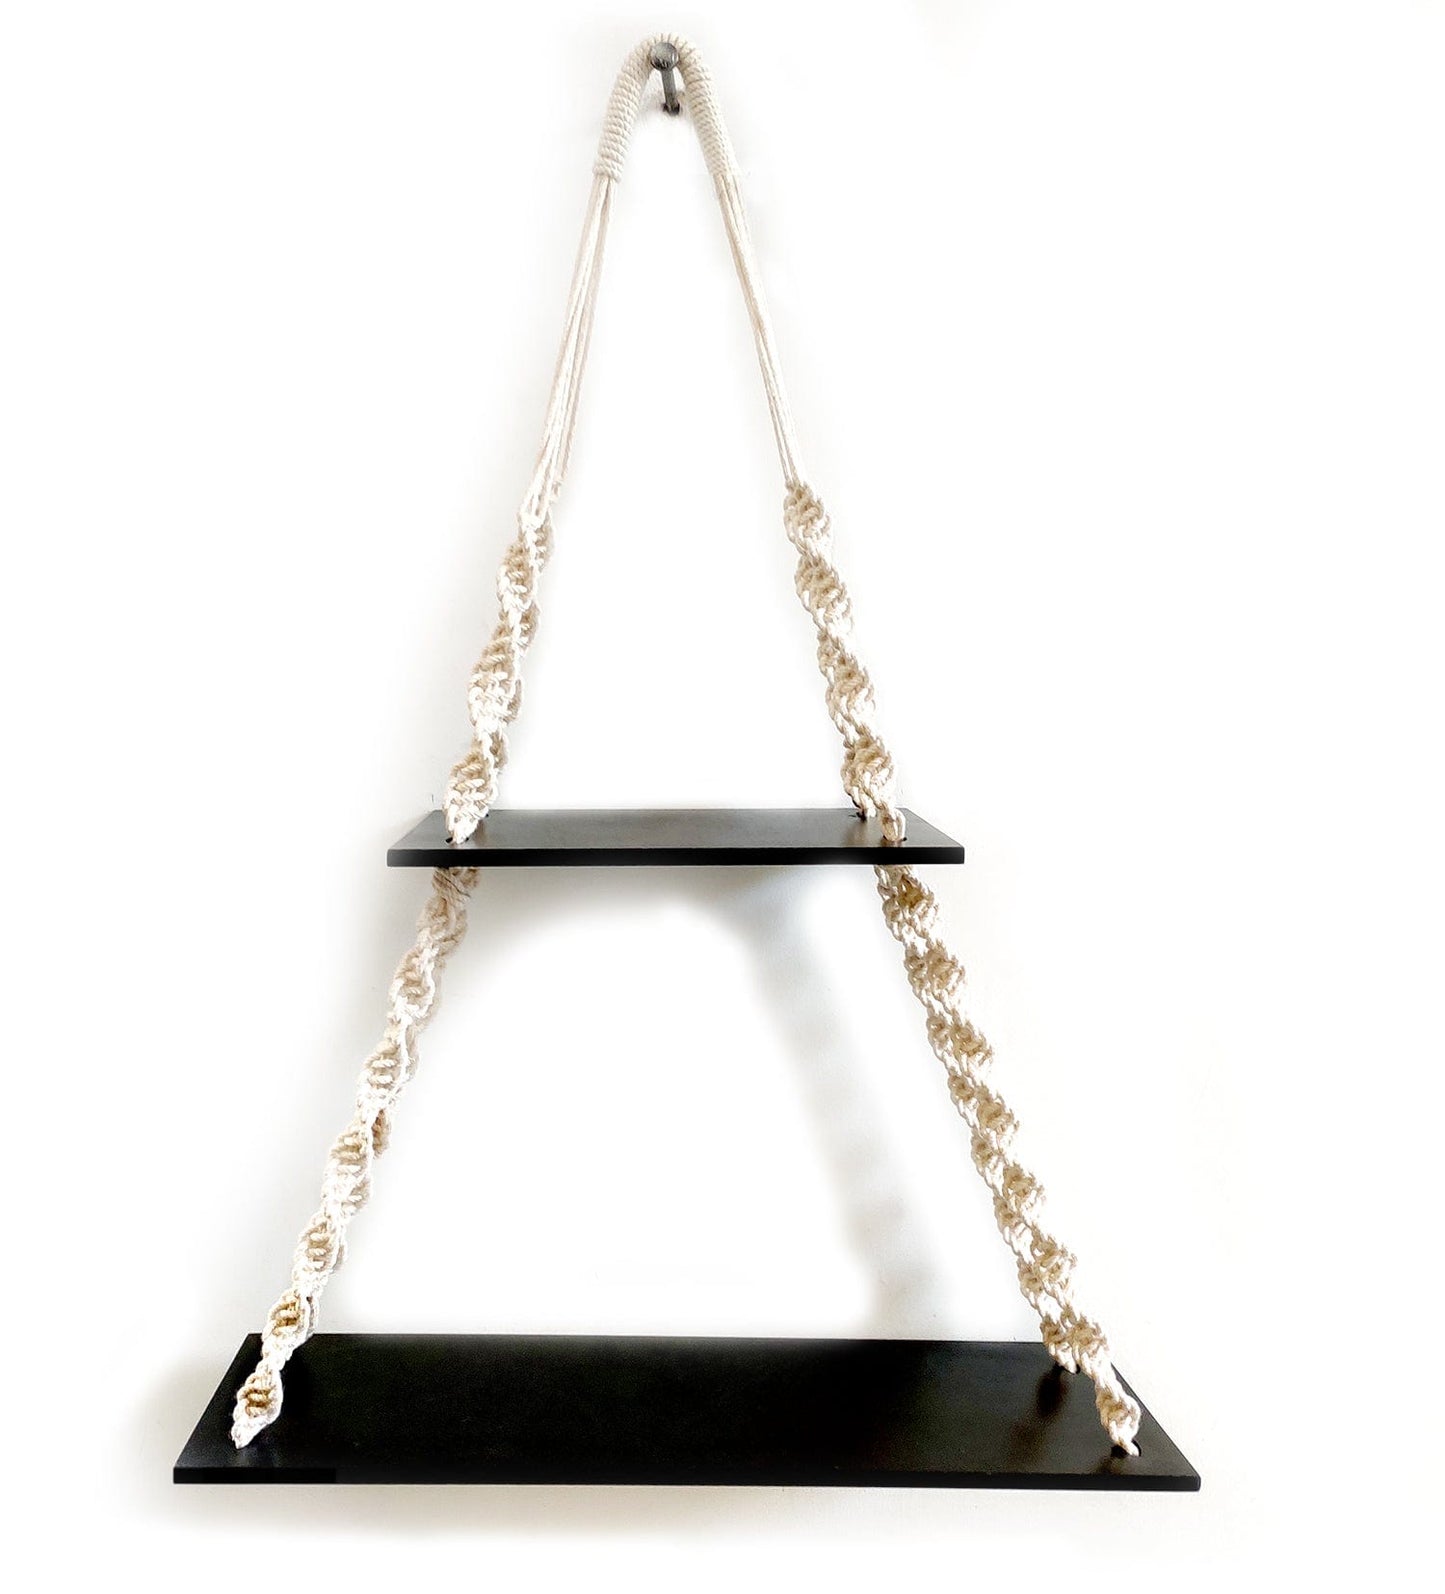 2 Tier Wooden Black Wall Hanging Shelves With Rope